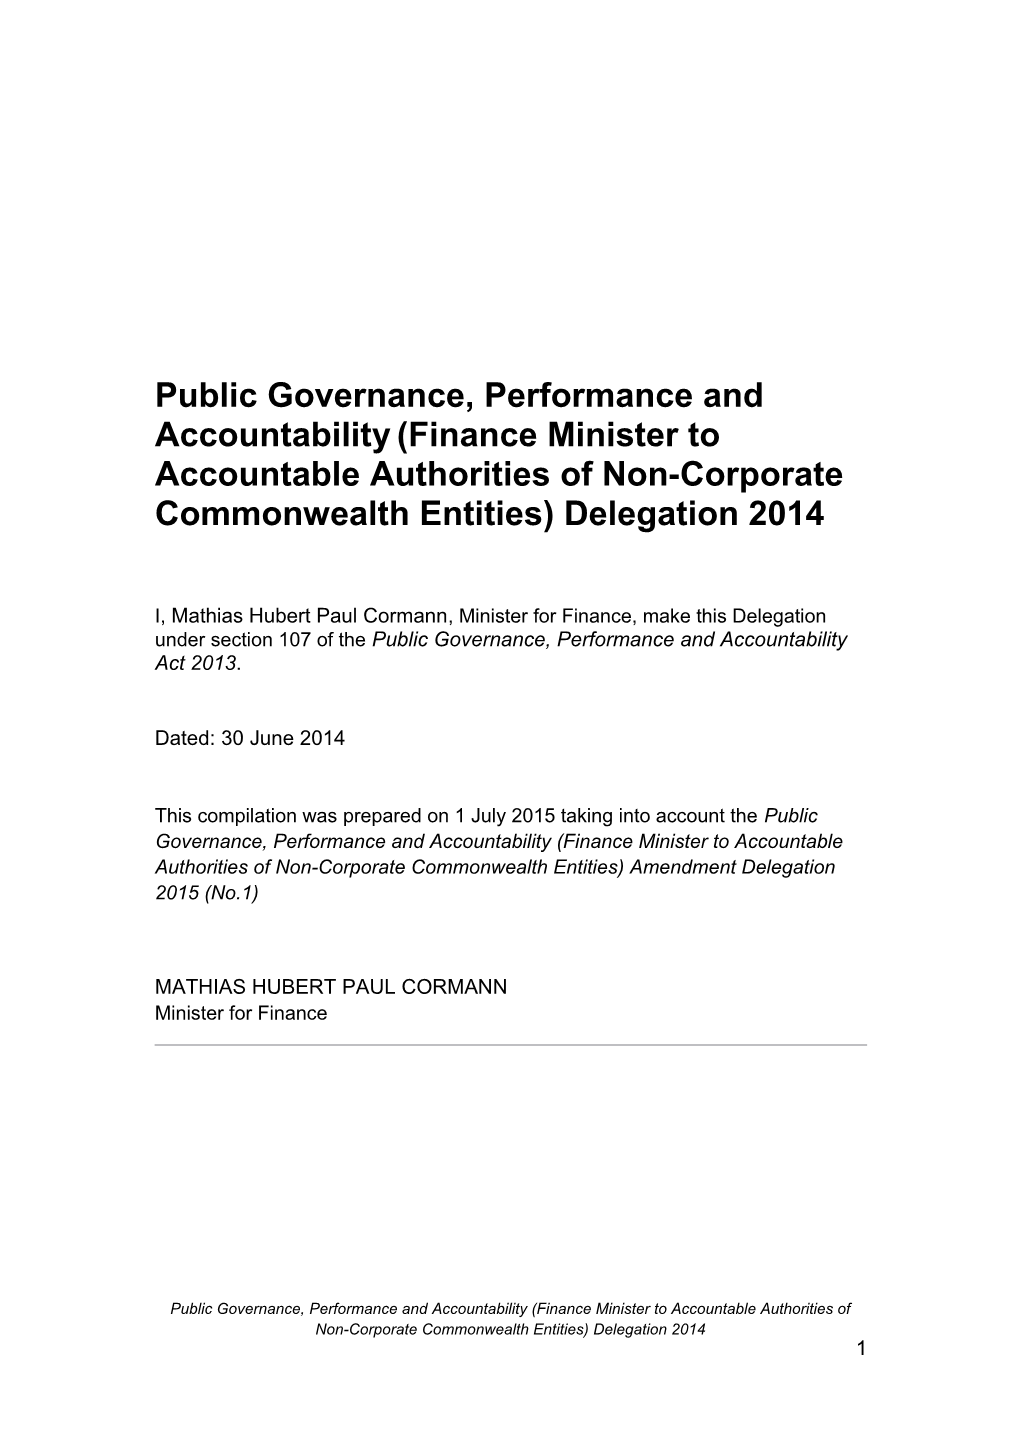 Public Governance, Performance and Accountability (Finance Minister to Accountable Authorities